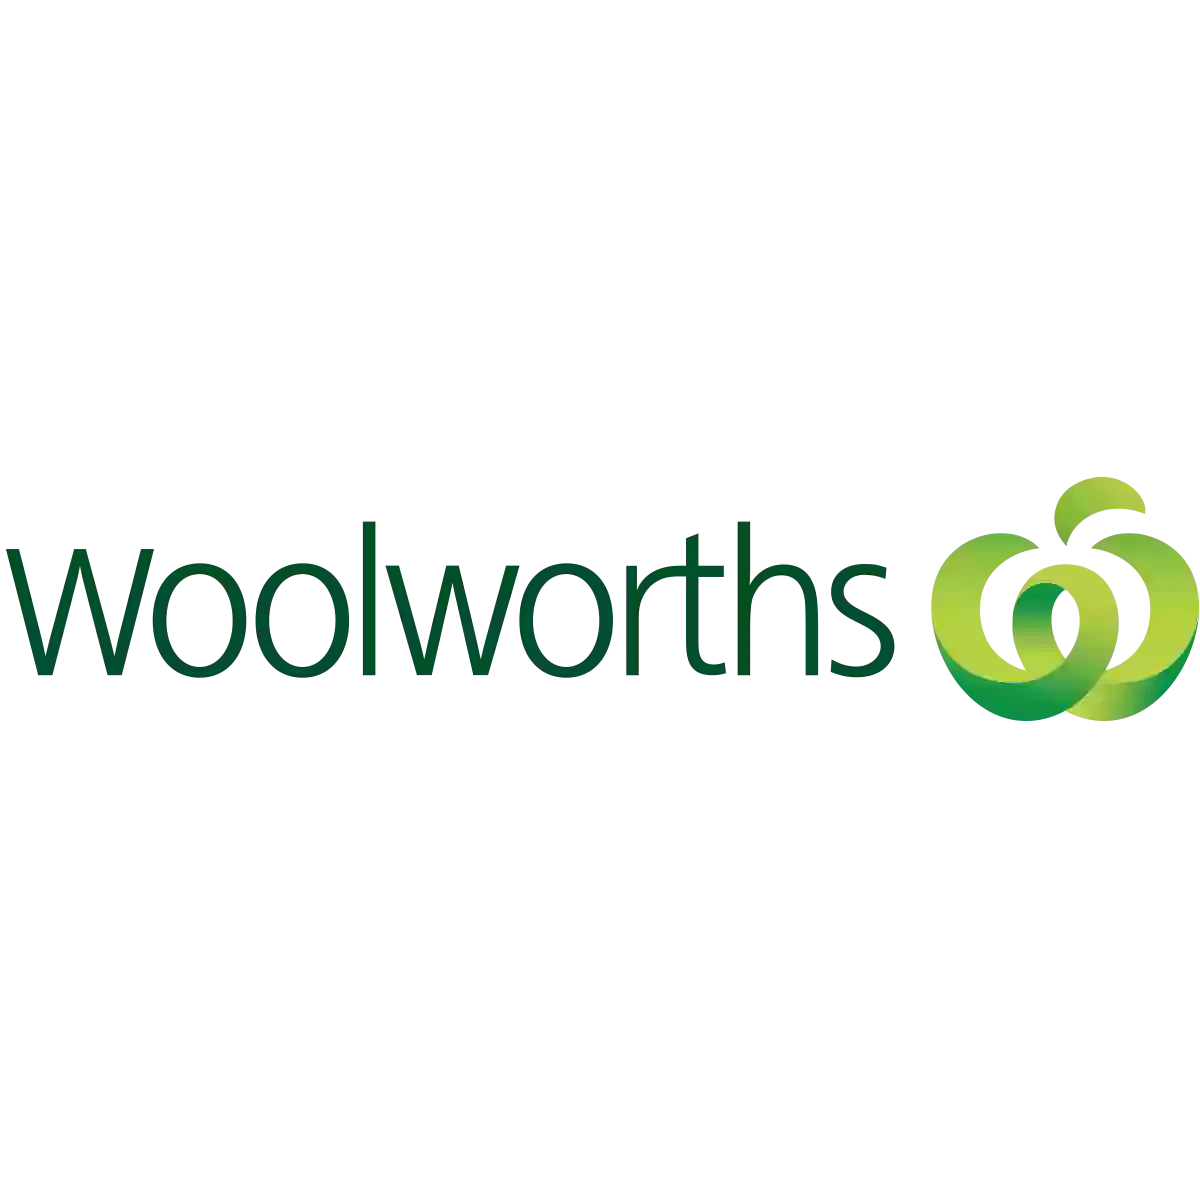 Woolworths Cowes